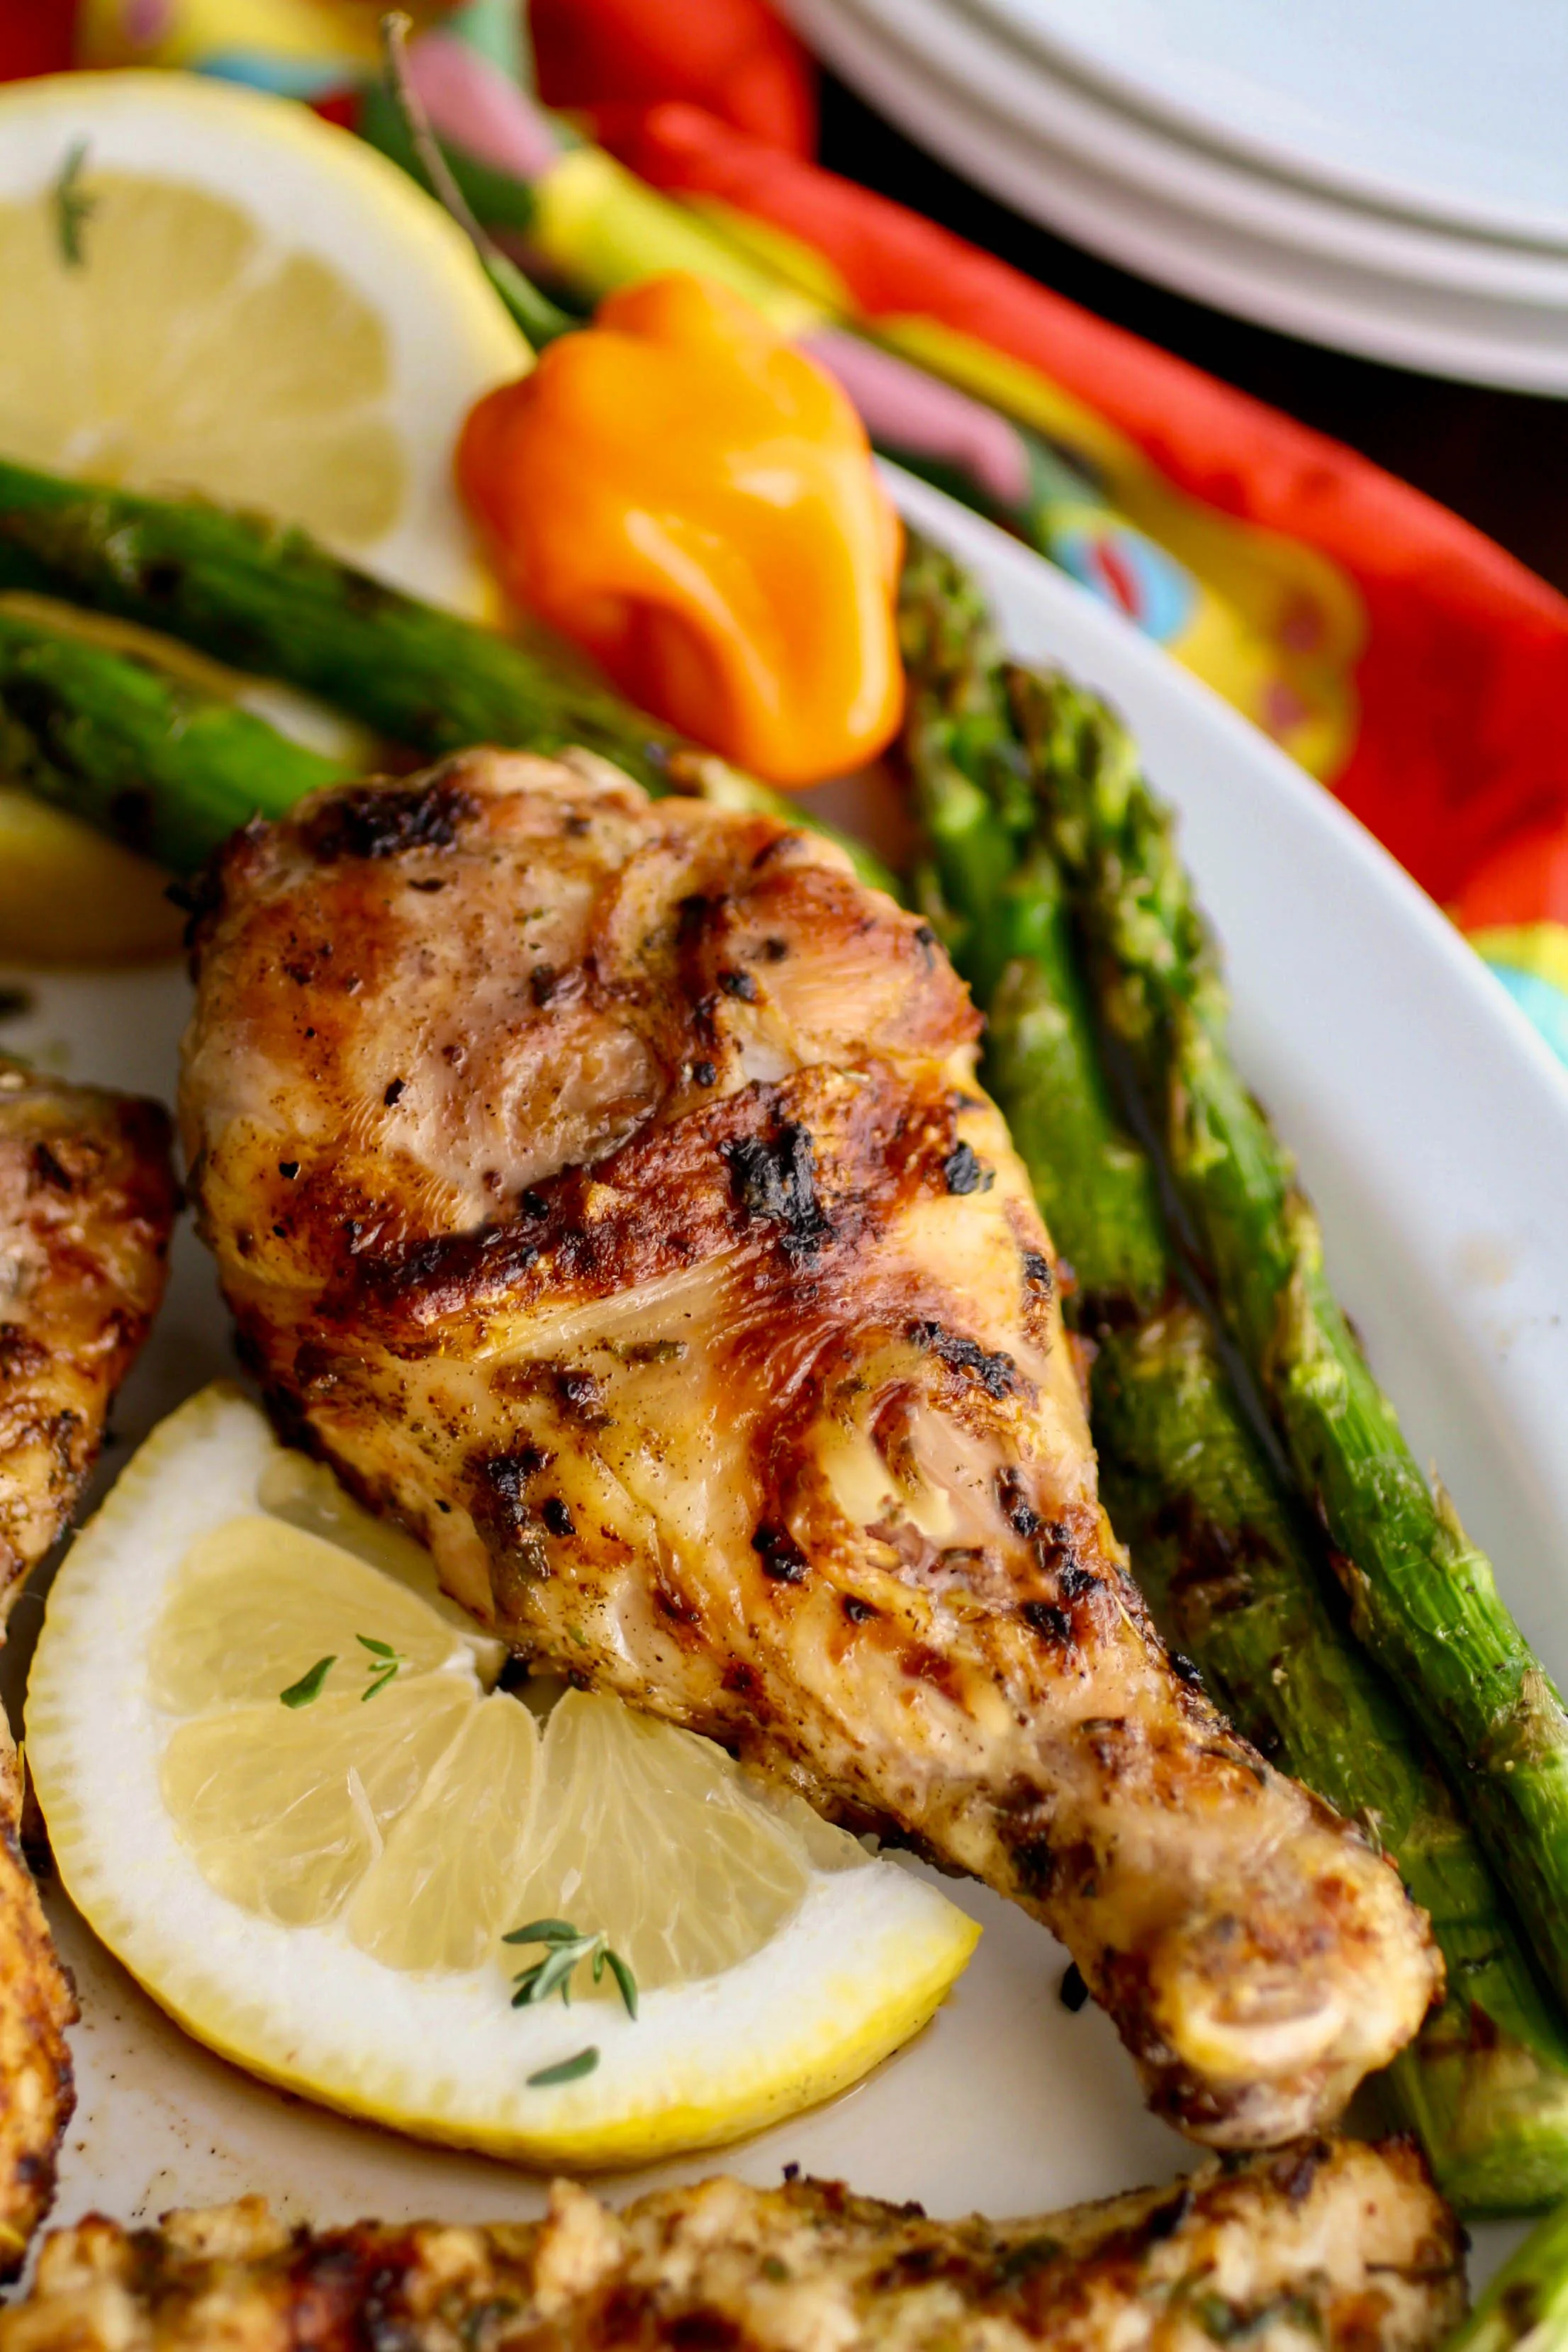 Jerk chicken is an easy and delicious main dish to serve. You'll love how easy it is to make!